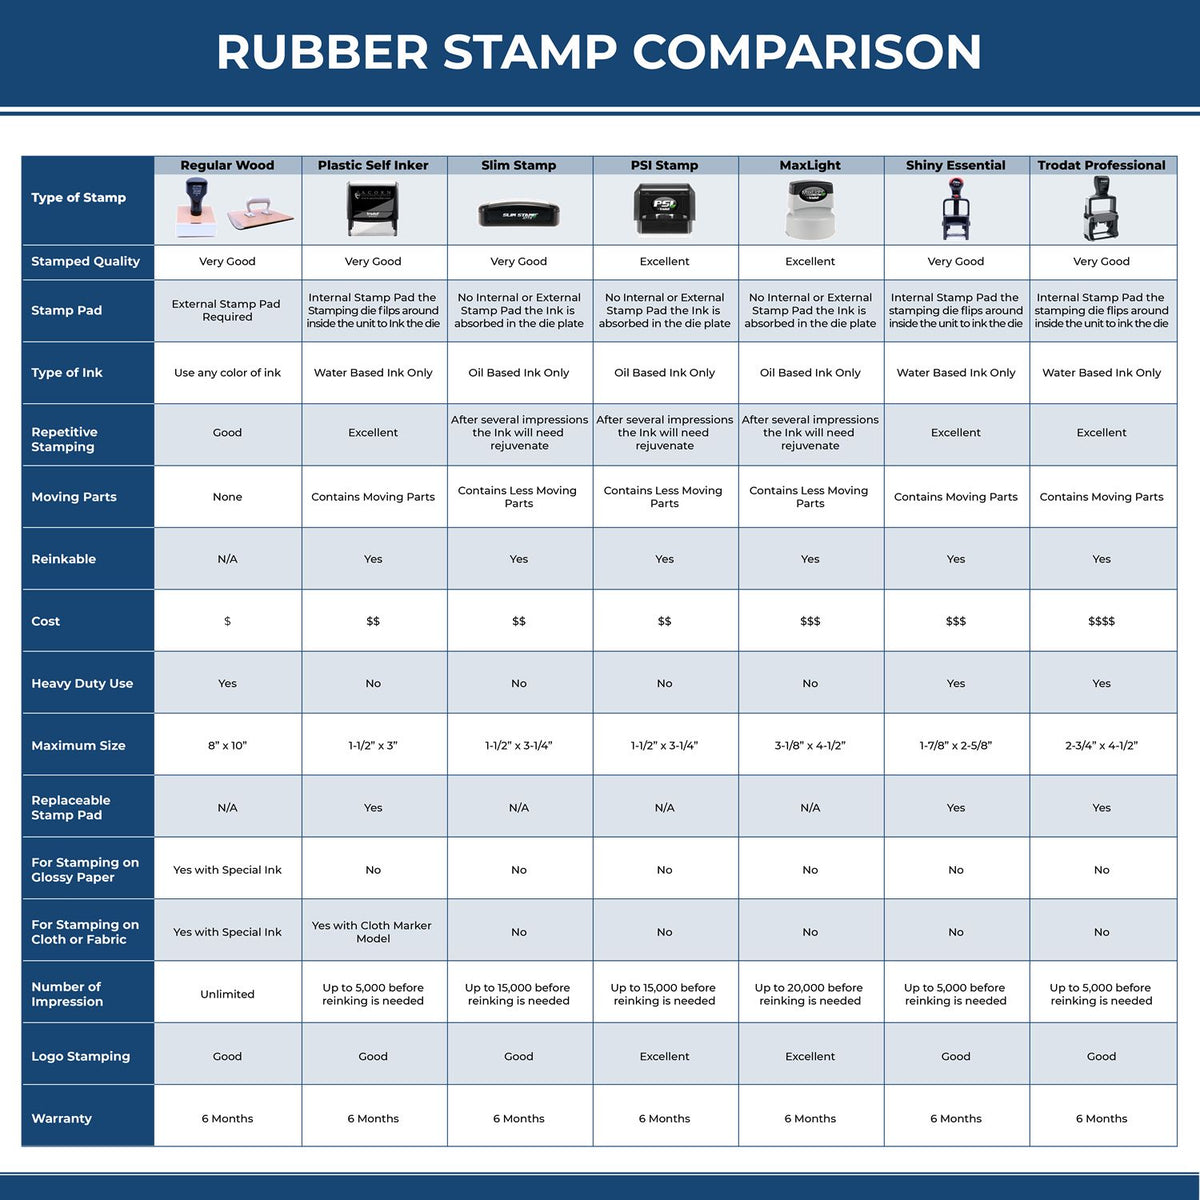 A comparison chart for the different types of mount models available for the Self-Inking Rectangular South Dakota Notary Stamp.